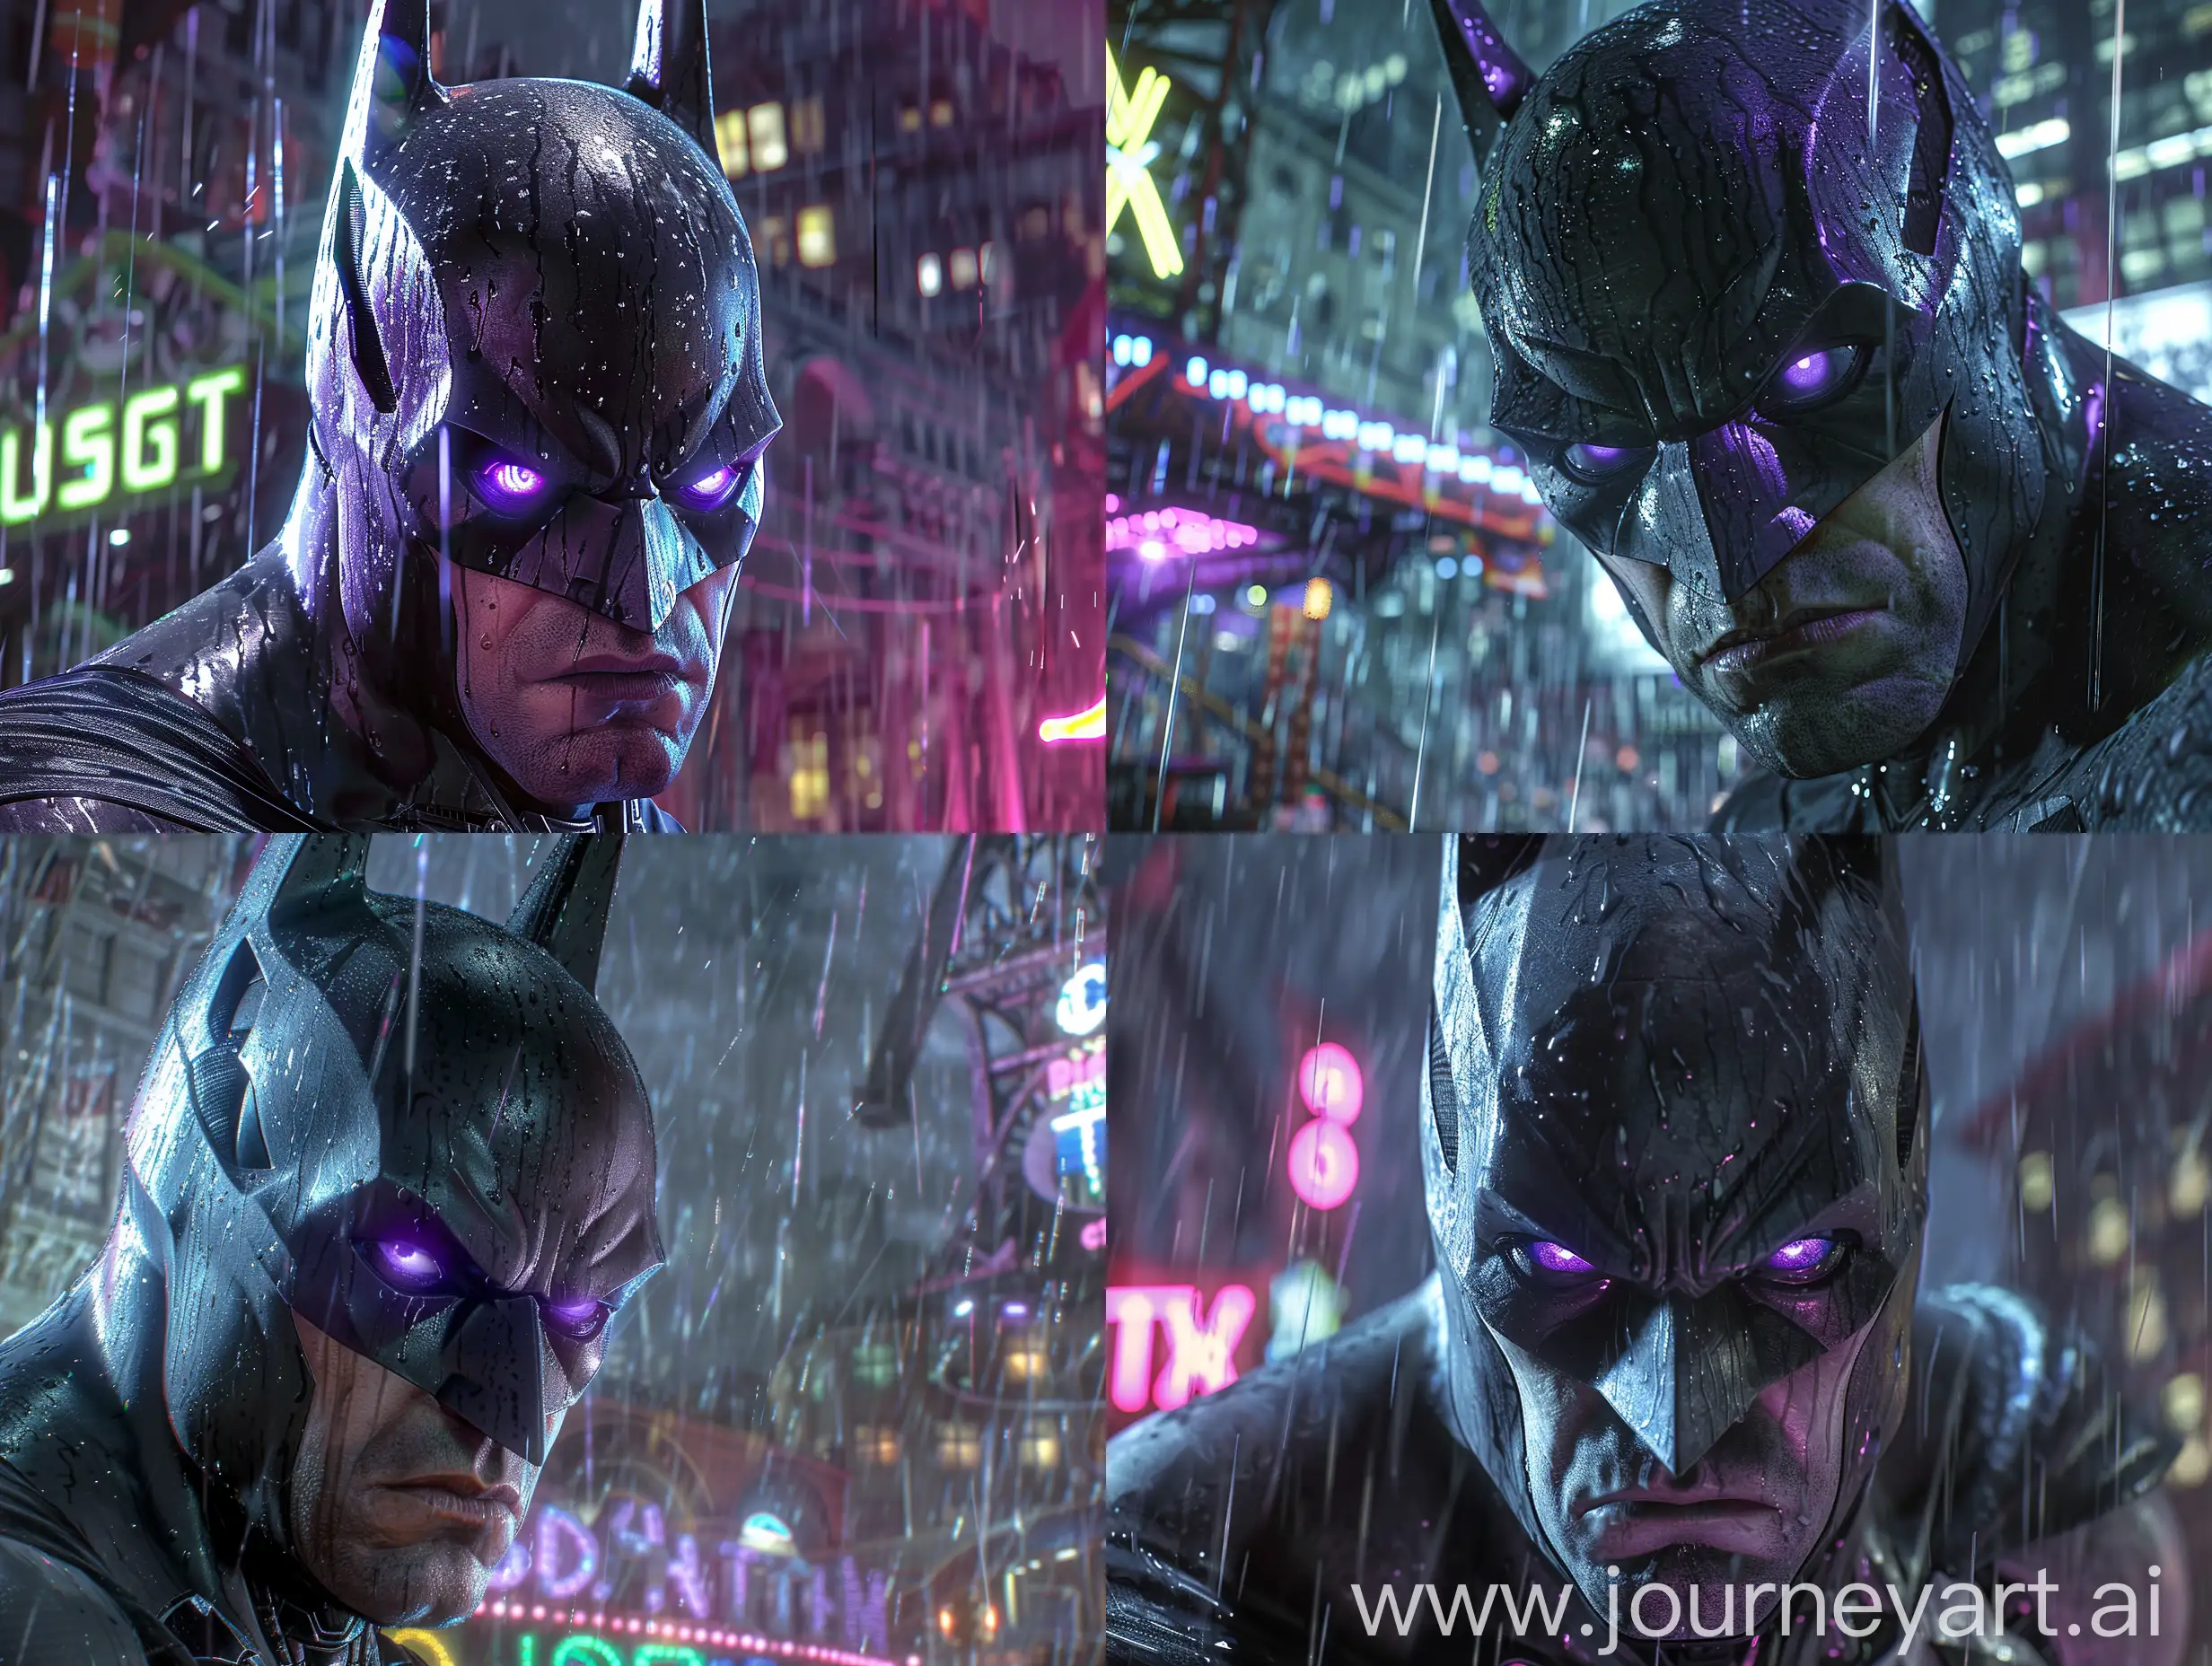 Batman from arkham series doing an adventure,full rain and thunders,closeup shot,grim city,neon lights,glowing purple eyes,extrwemely detailed,rtx on,path ray tracing,dramatic background,gothic gotham 